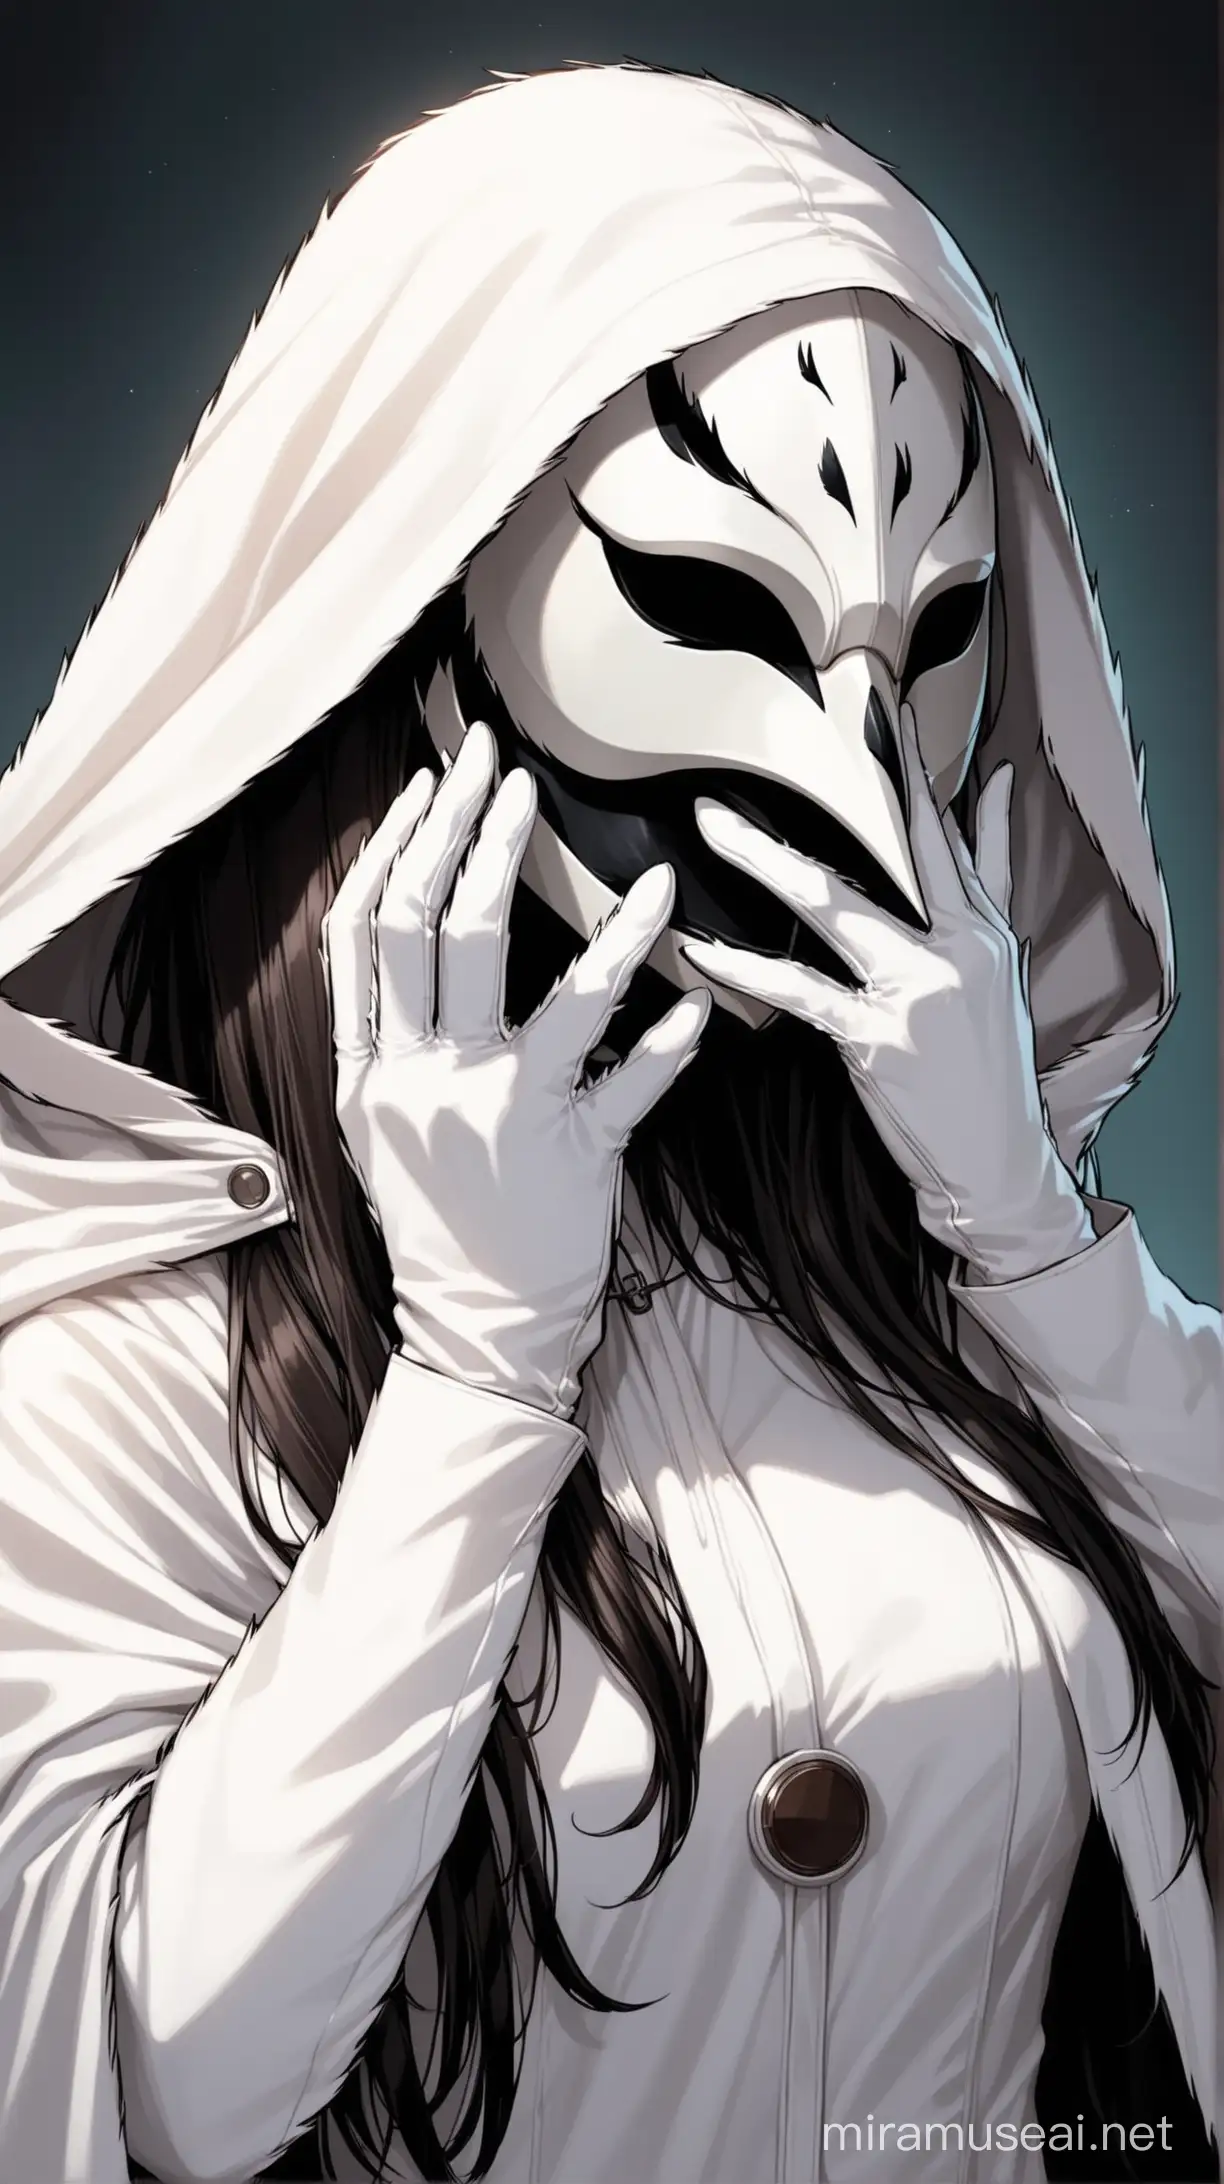 Plague Doctor Woman Wearing White Leather Crow Mask